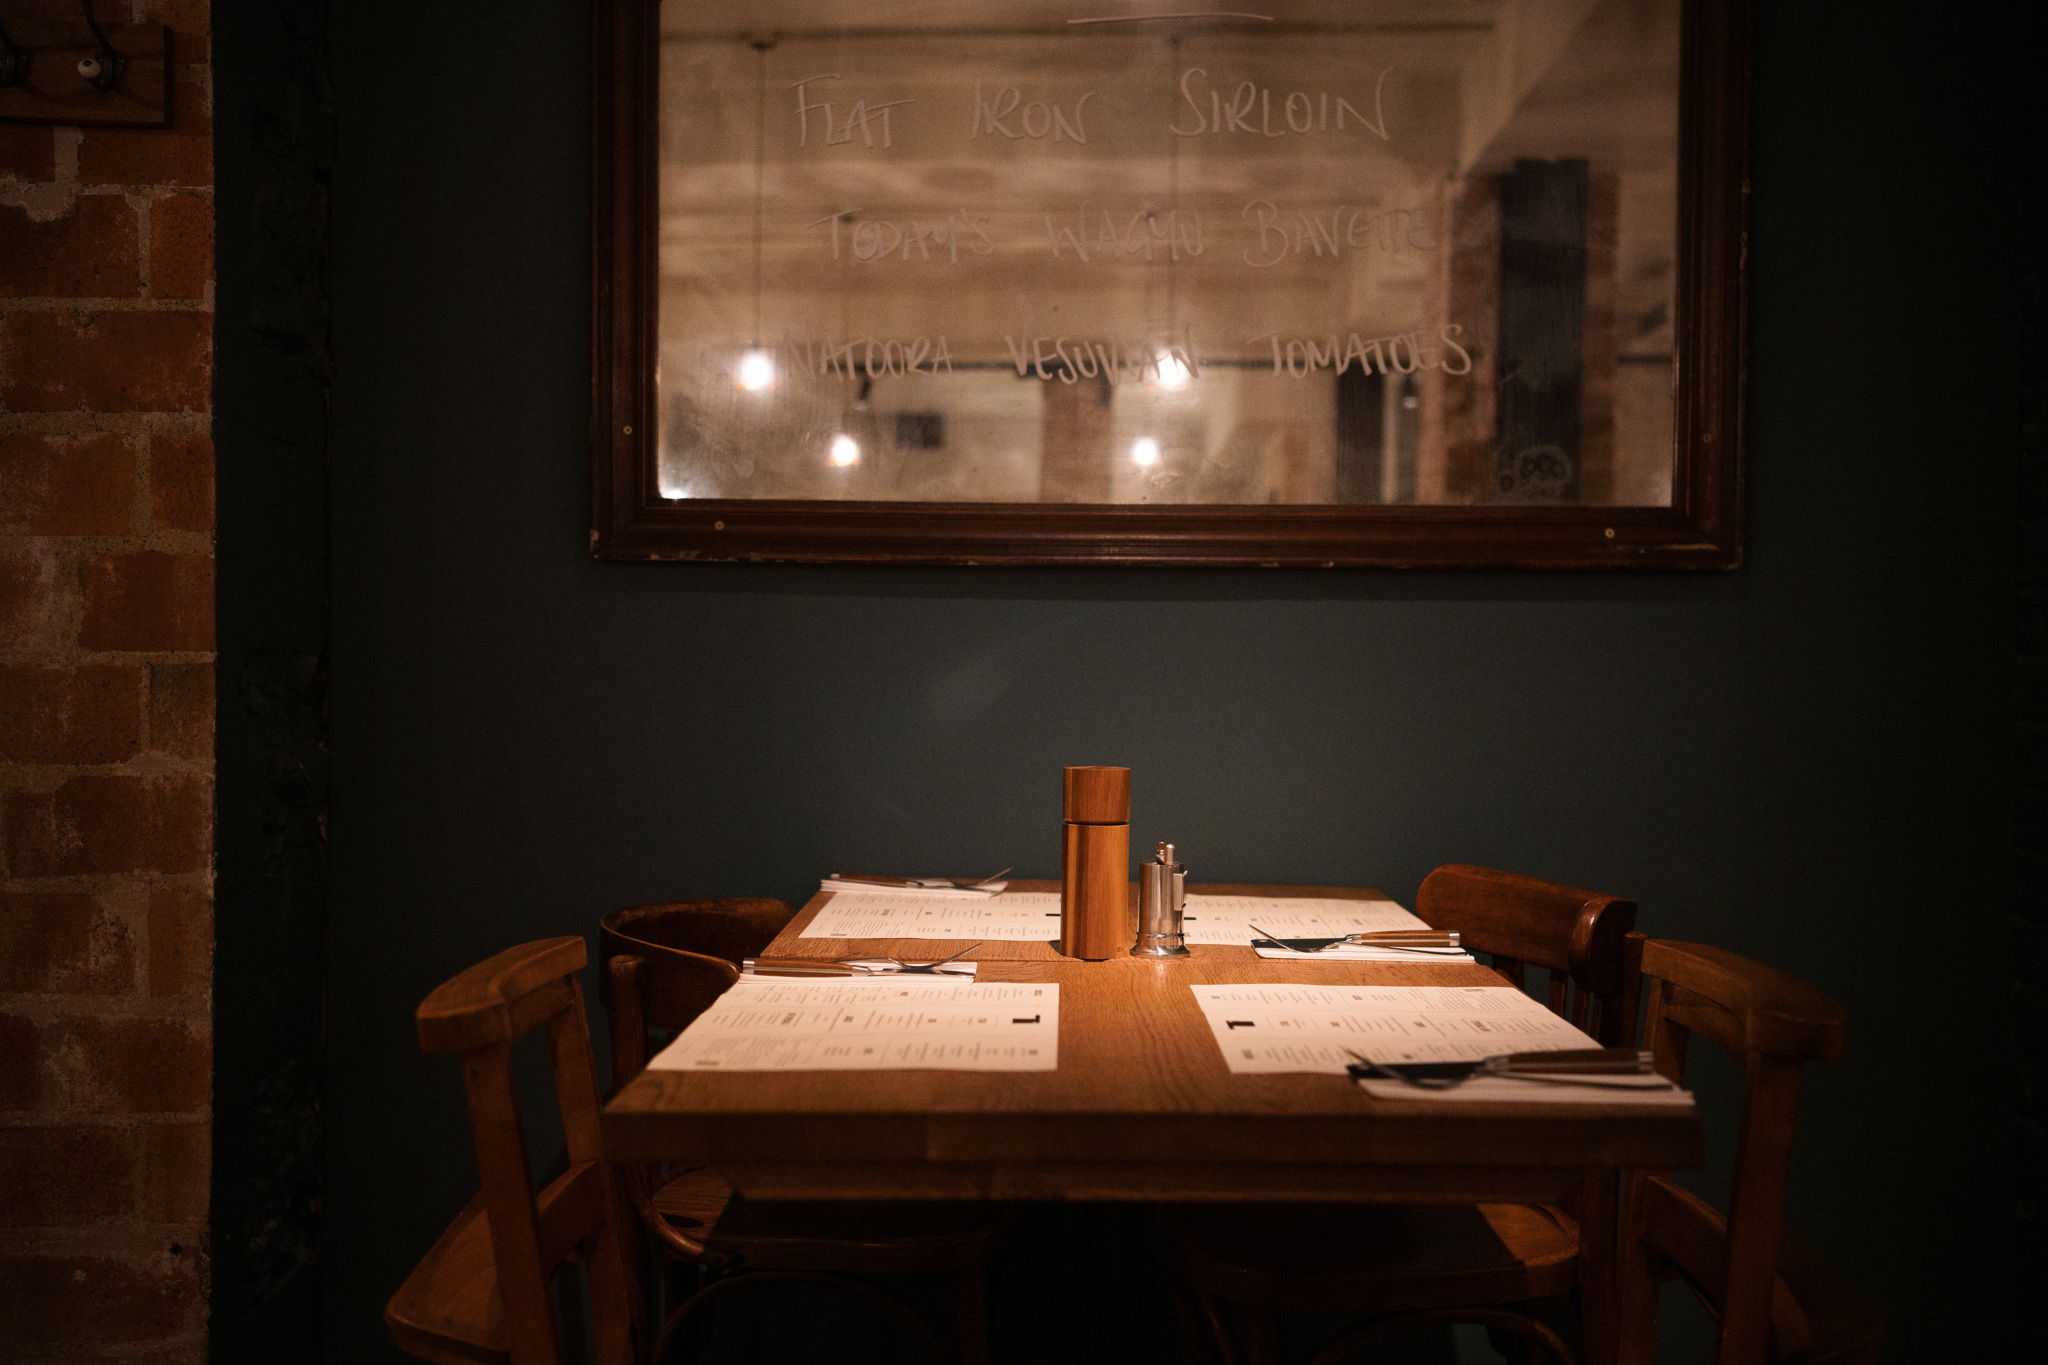 Table setting with mirror with menu options written on it, cosy lighting.